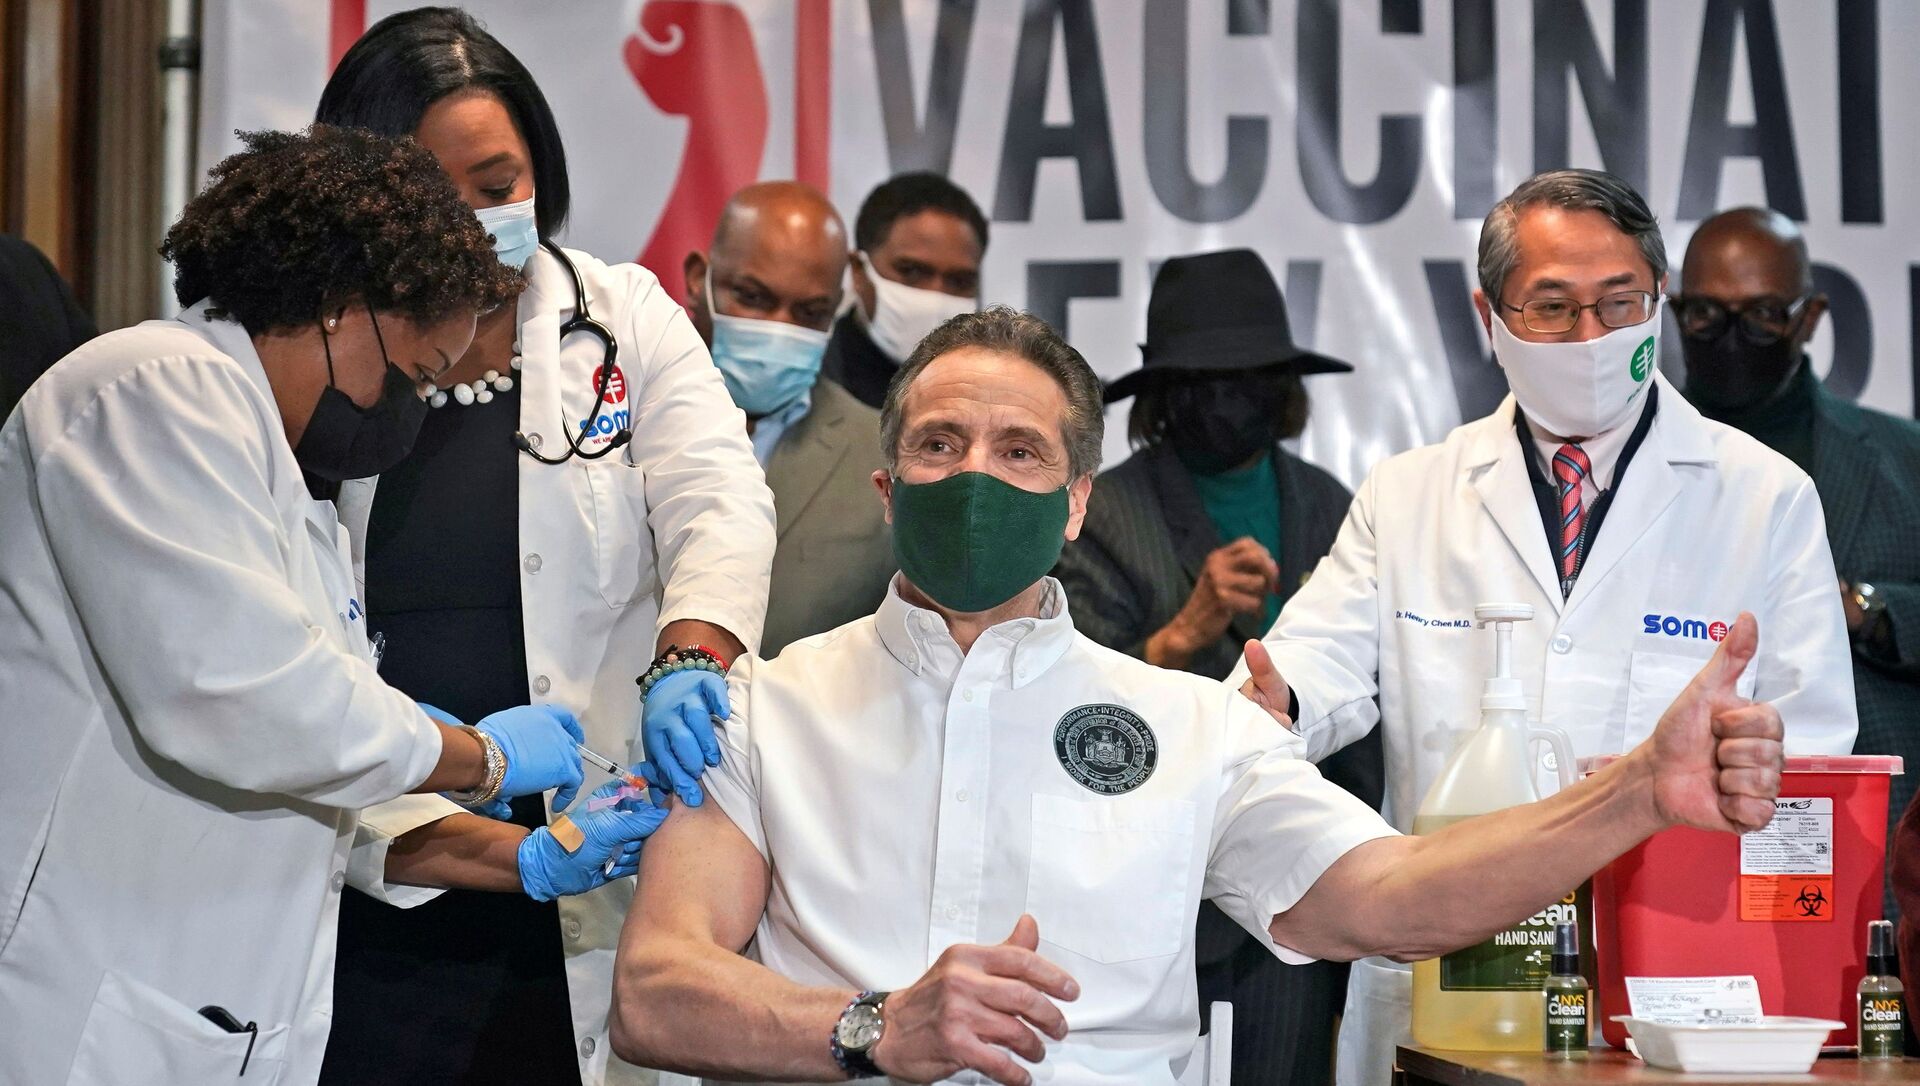 New York Governor Andrew Cuomo is vaccinated at a church in the Harlem neighborhood of New York City amid the coronavirus disease (COVID-19) pandemic, New York, U.S., March 17, 2021 - Sputnik International, 1920, 30.03.2021